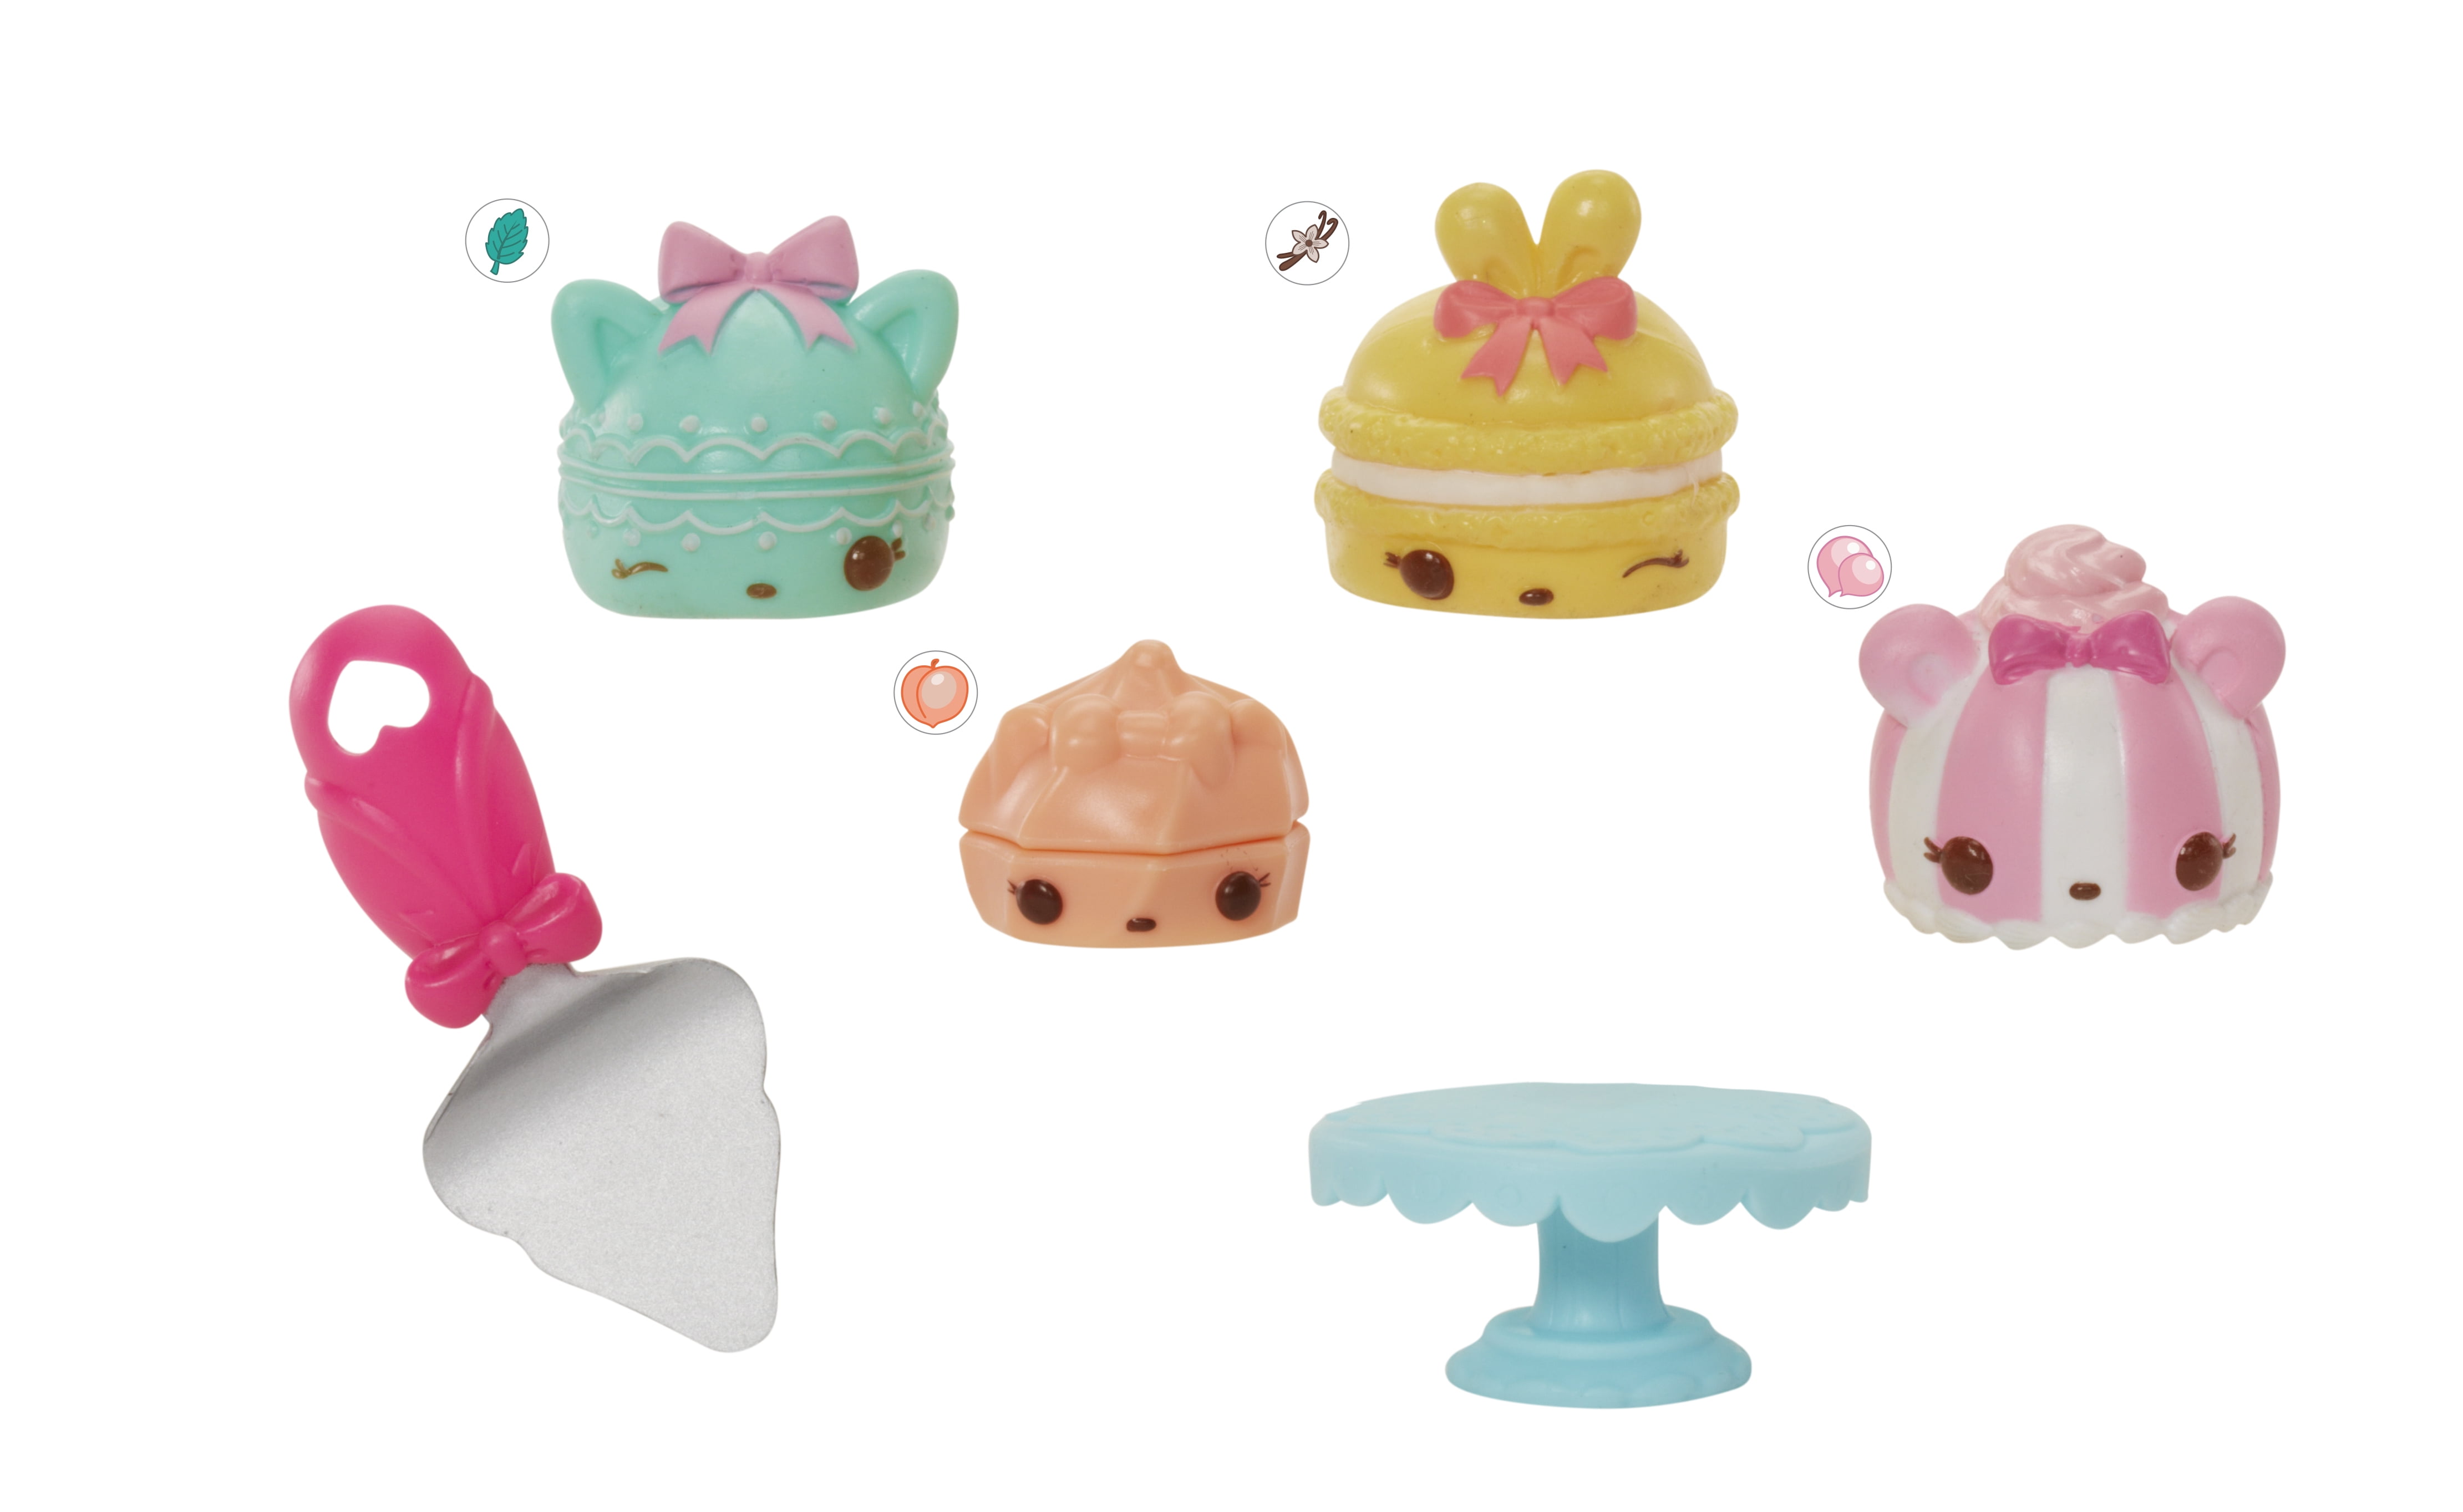 Num Noms Mystery Pack Series 4 6pk Small Food Toy